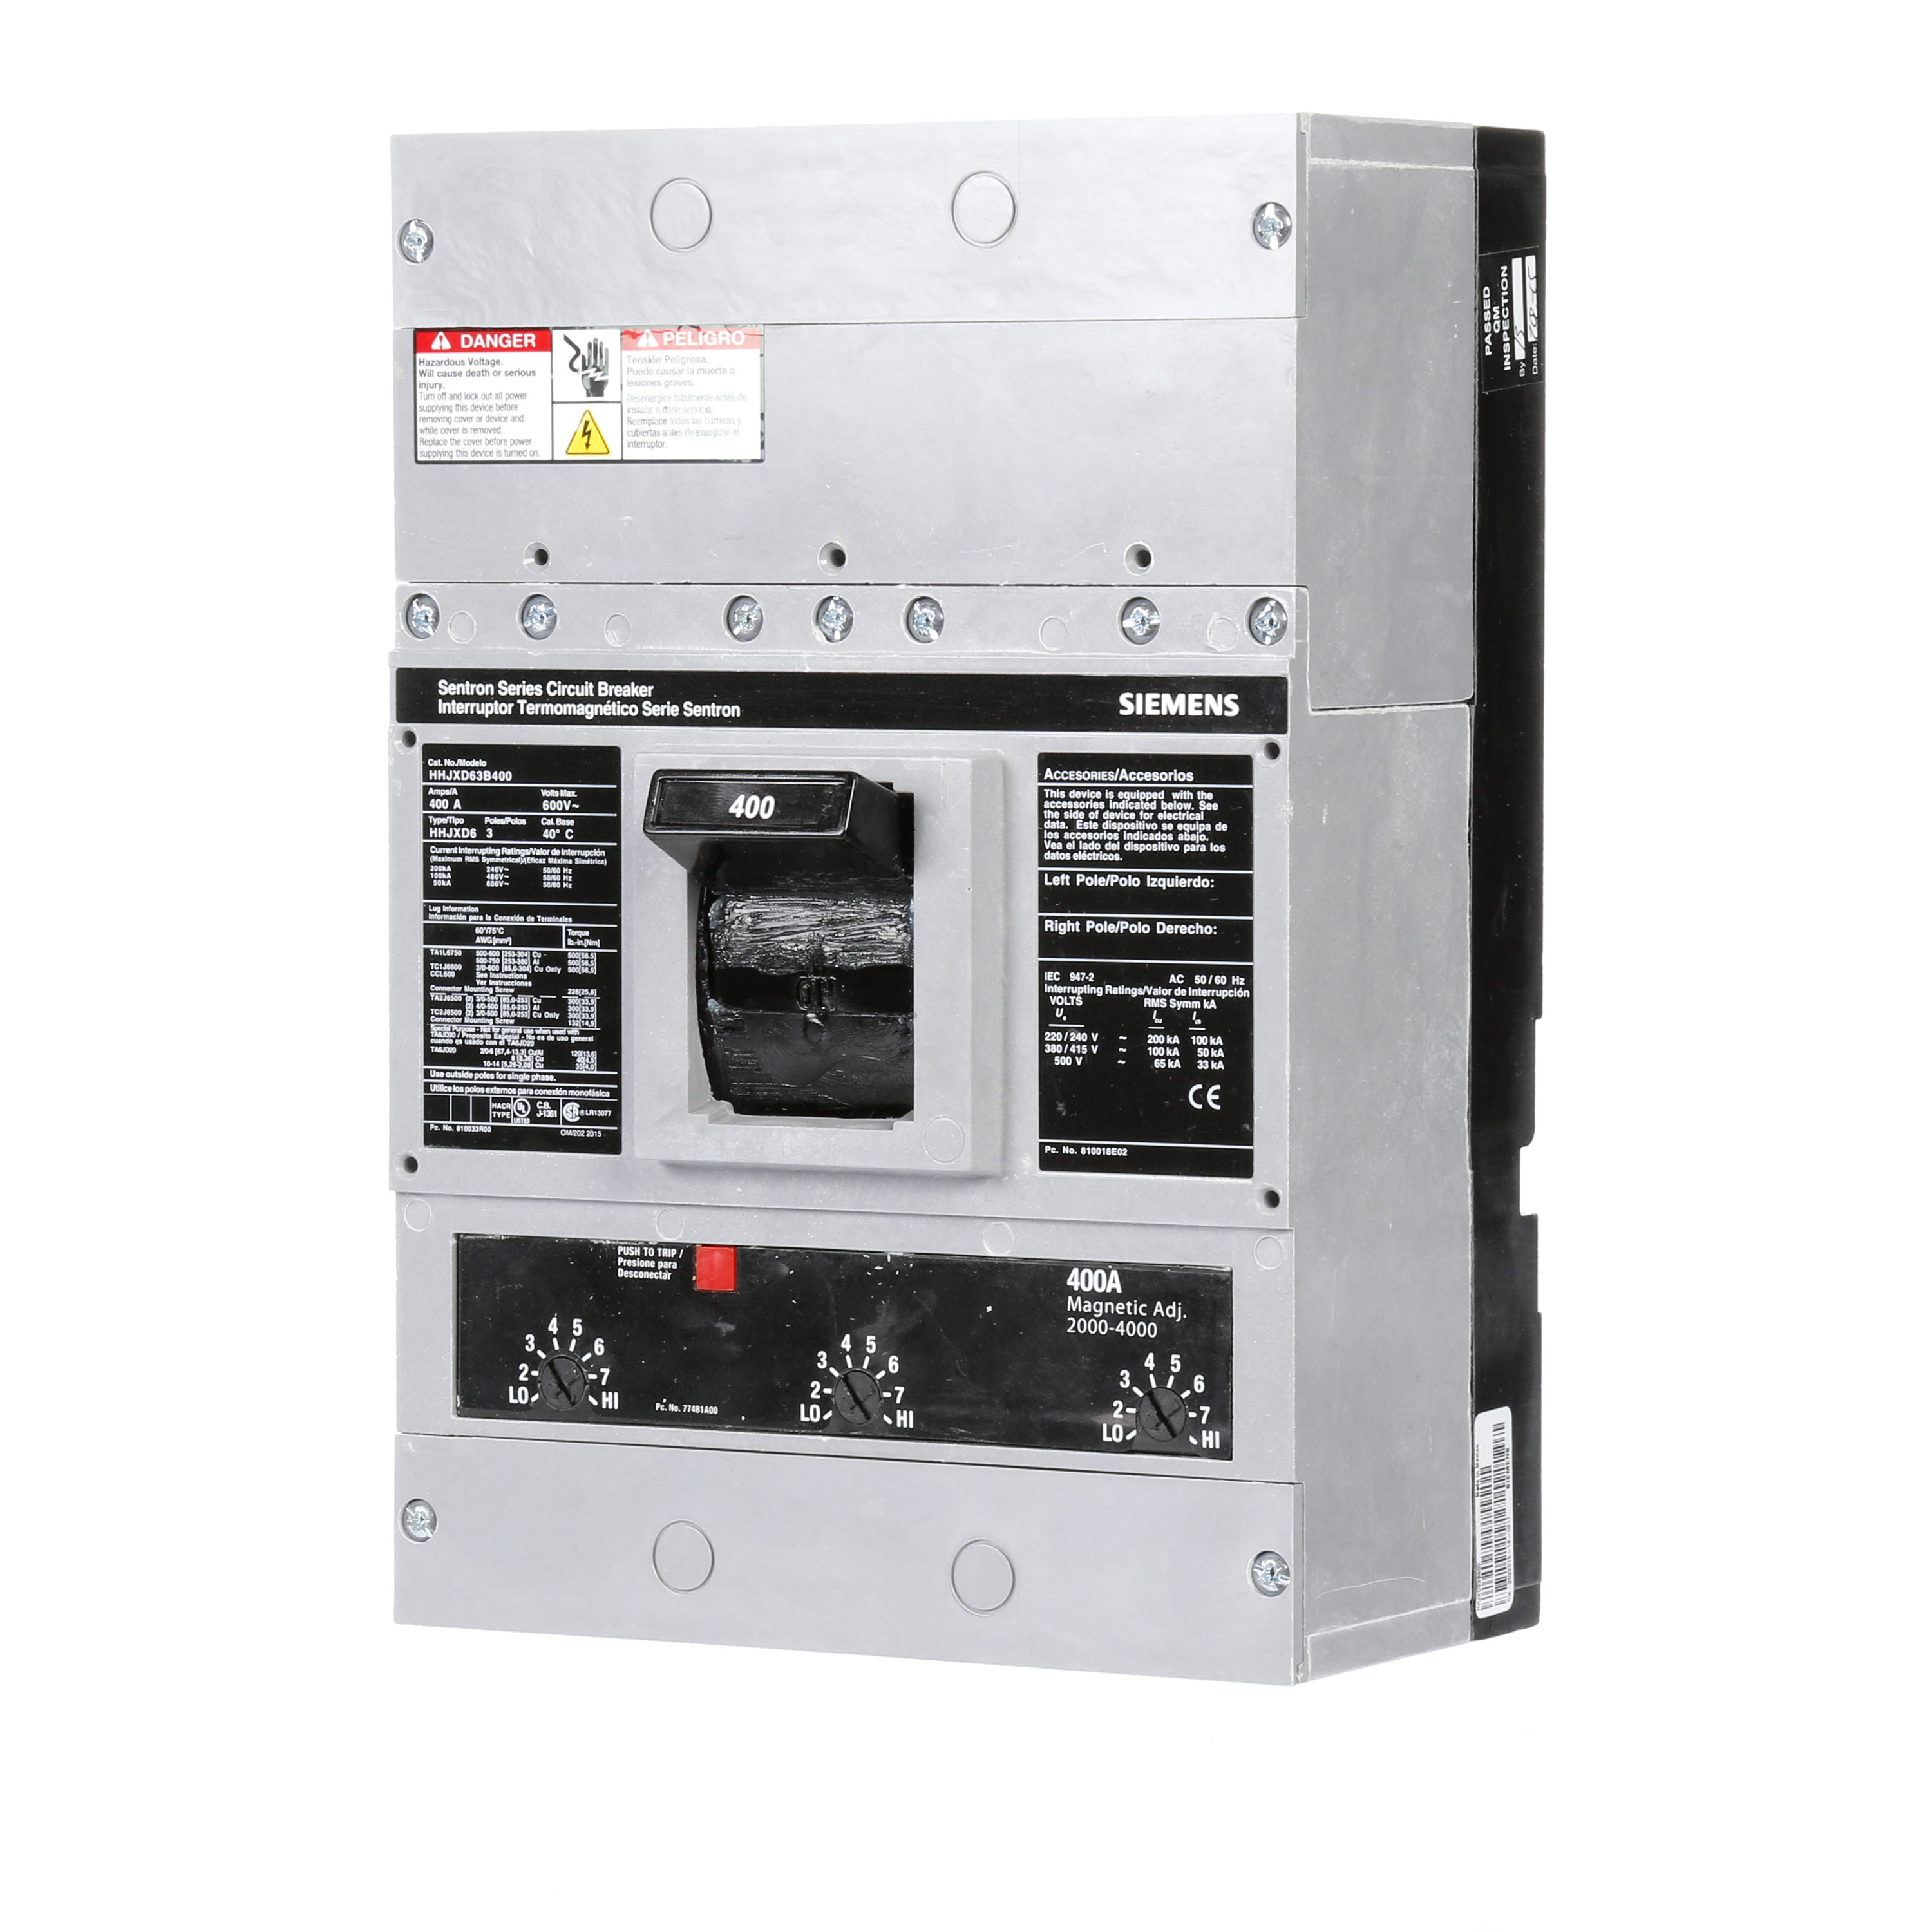 SIEMENS LOW VOLTAGE SENTRON MOLDED CASE CIRCUIT BREAKER WITH THERMAL - MAGNETICTRIP UNIT. ASSEMBLED STANDARD 40 DEG C BREAKER JD FRAME WITH EXTRA HIGH BREAKING CAPACITY. 400A 3-POLE (50KAIC AT 600V) (100KAIC AT 480V). NON-INTERCHANGEABLE TRIP UNIT. SPECIAL FEATURES NO LUGS INSTALLED. DIMENSIONS (W x H x D) IN 7.50 x 11.0 x 4.00.